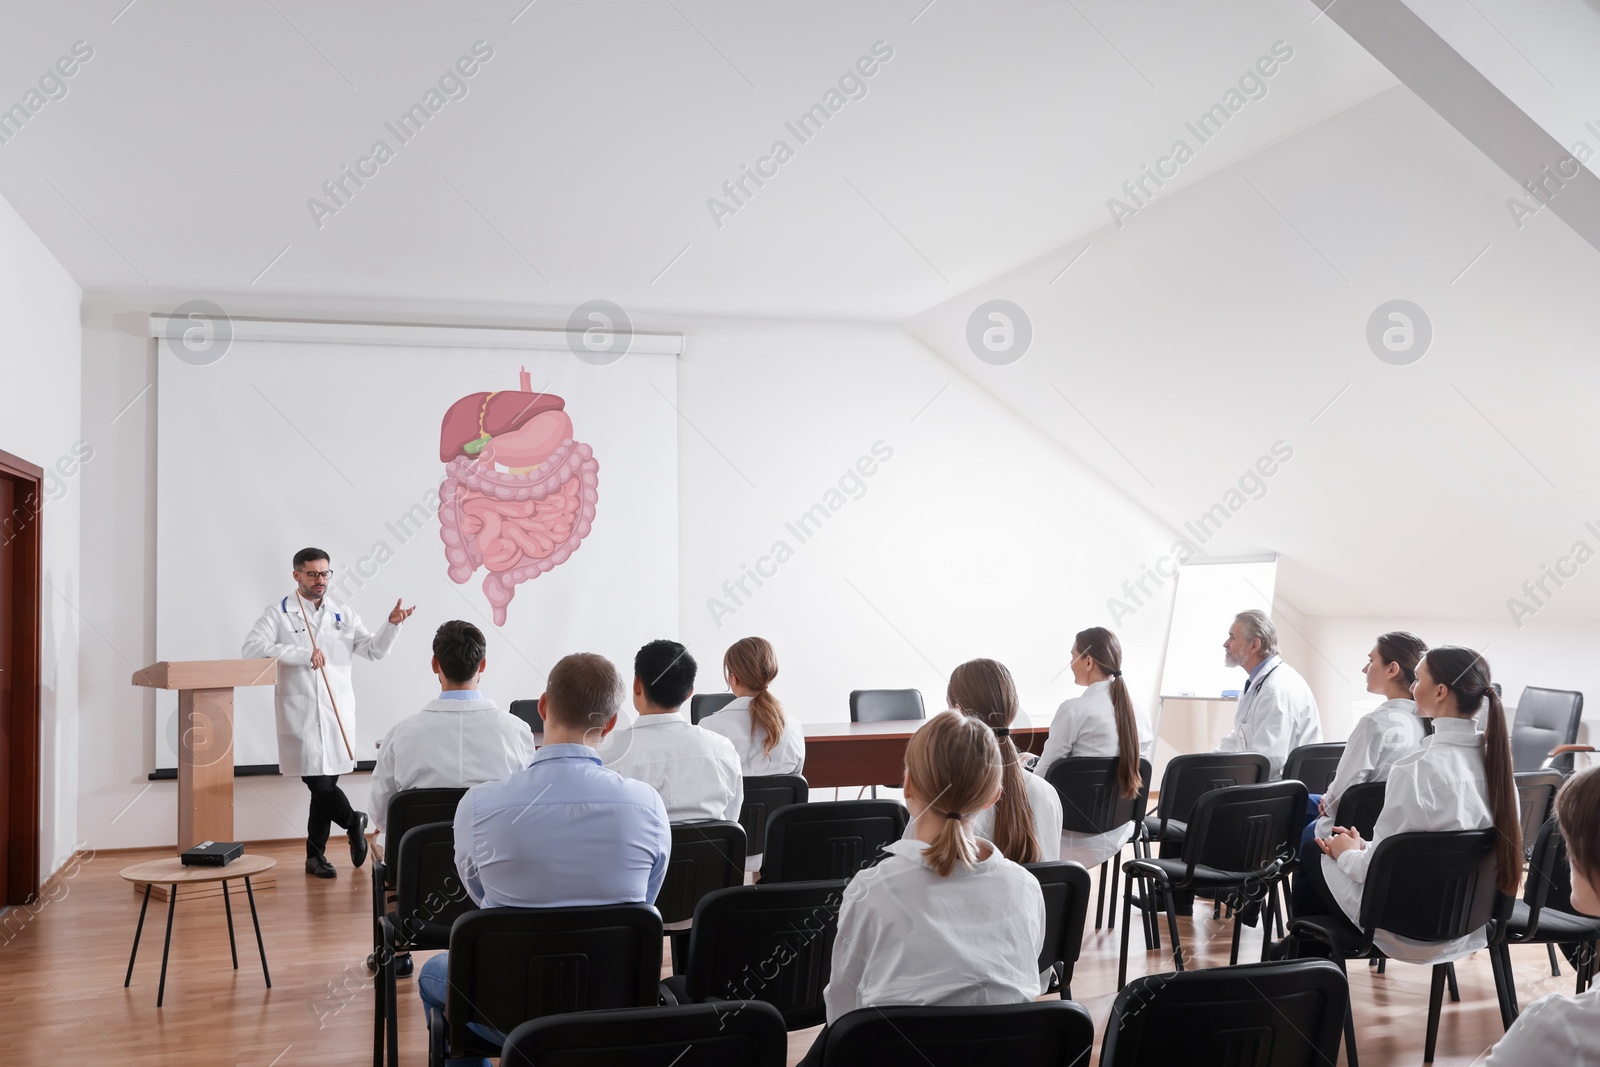 Image of Lecture in gastroenterology. Professors and doctors in conference room. Projection screen with illustration of digestive tract